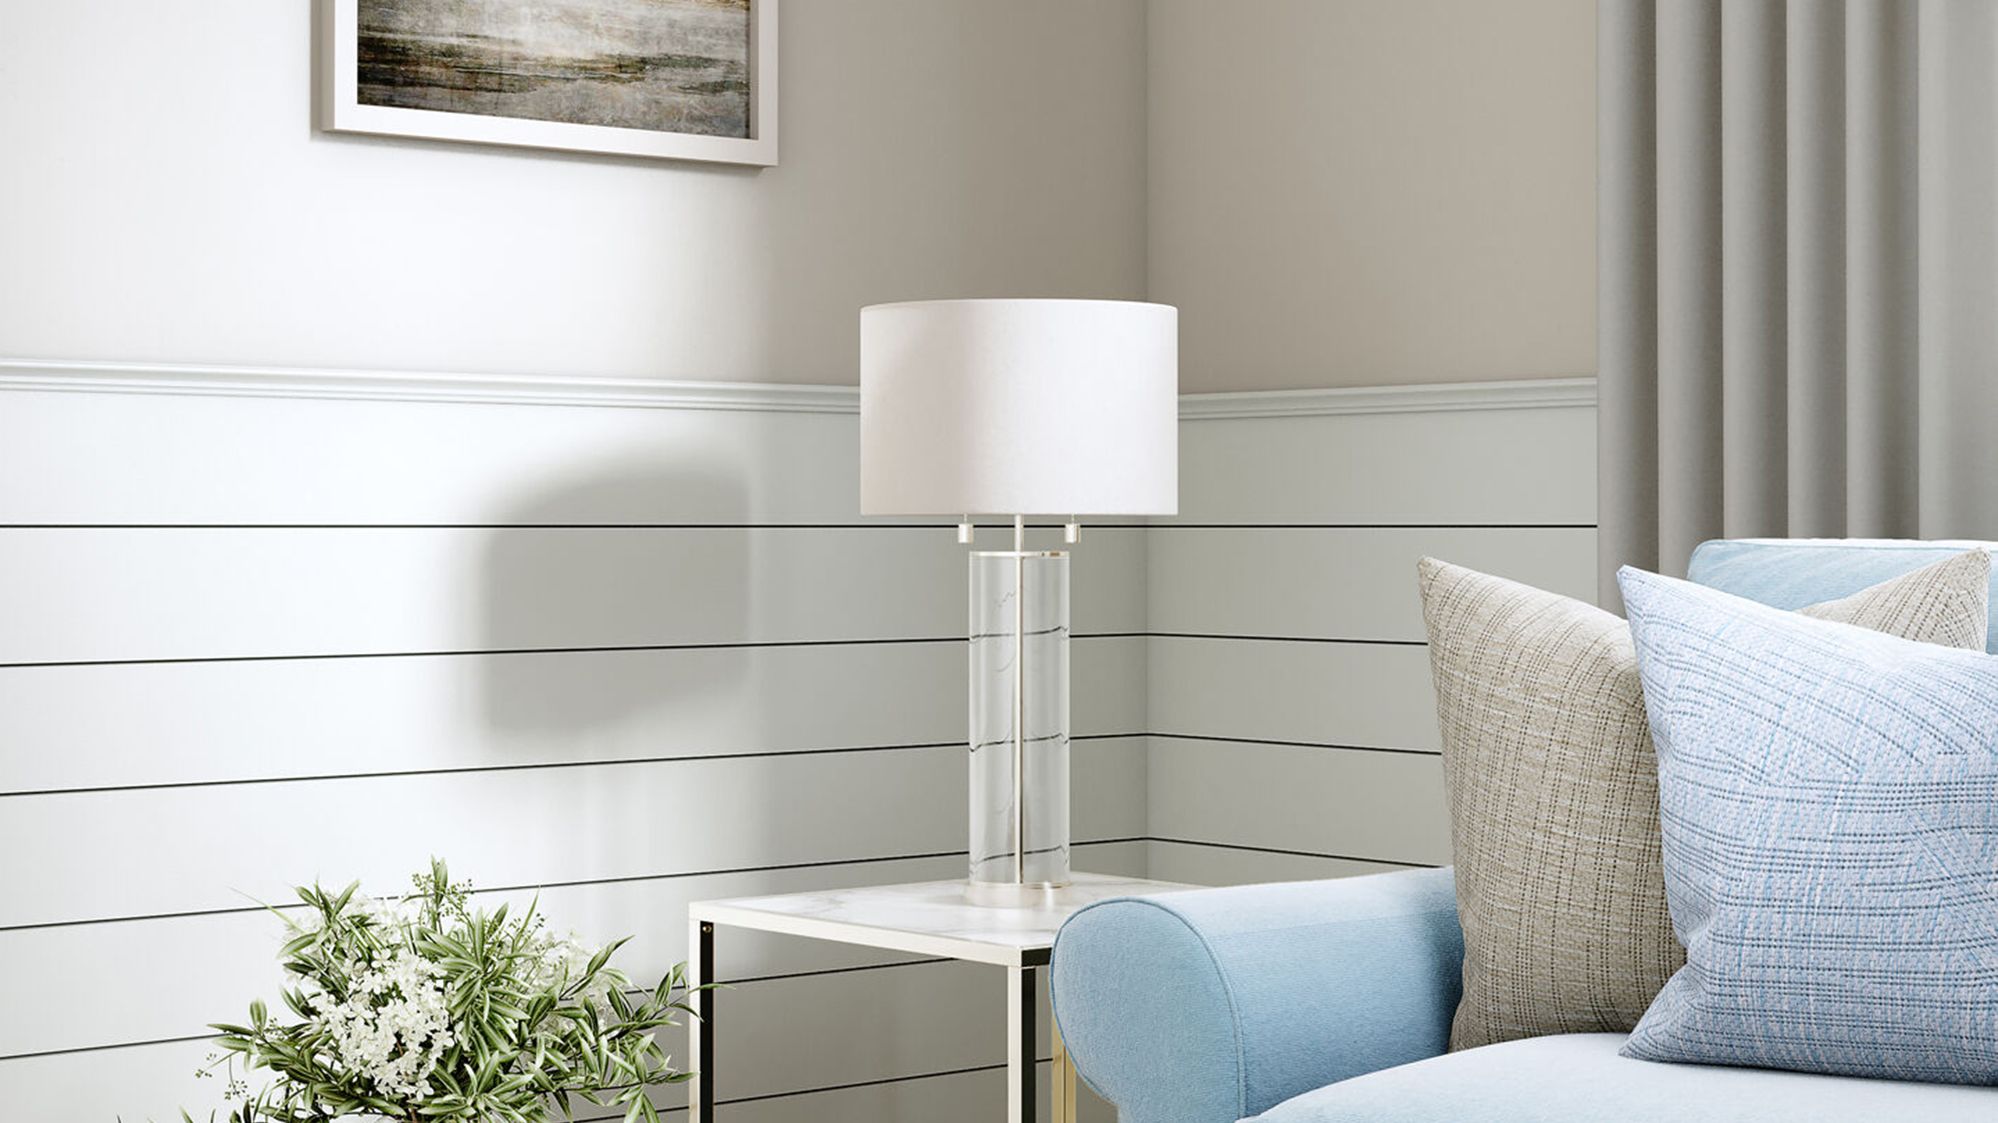 Small Stacked Glass Ball Table Lamp Base (includes Led Light Bulb) Brass -  Threshold™ : Target